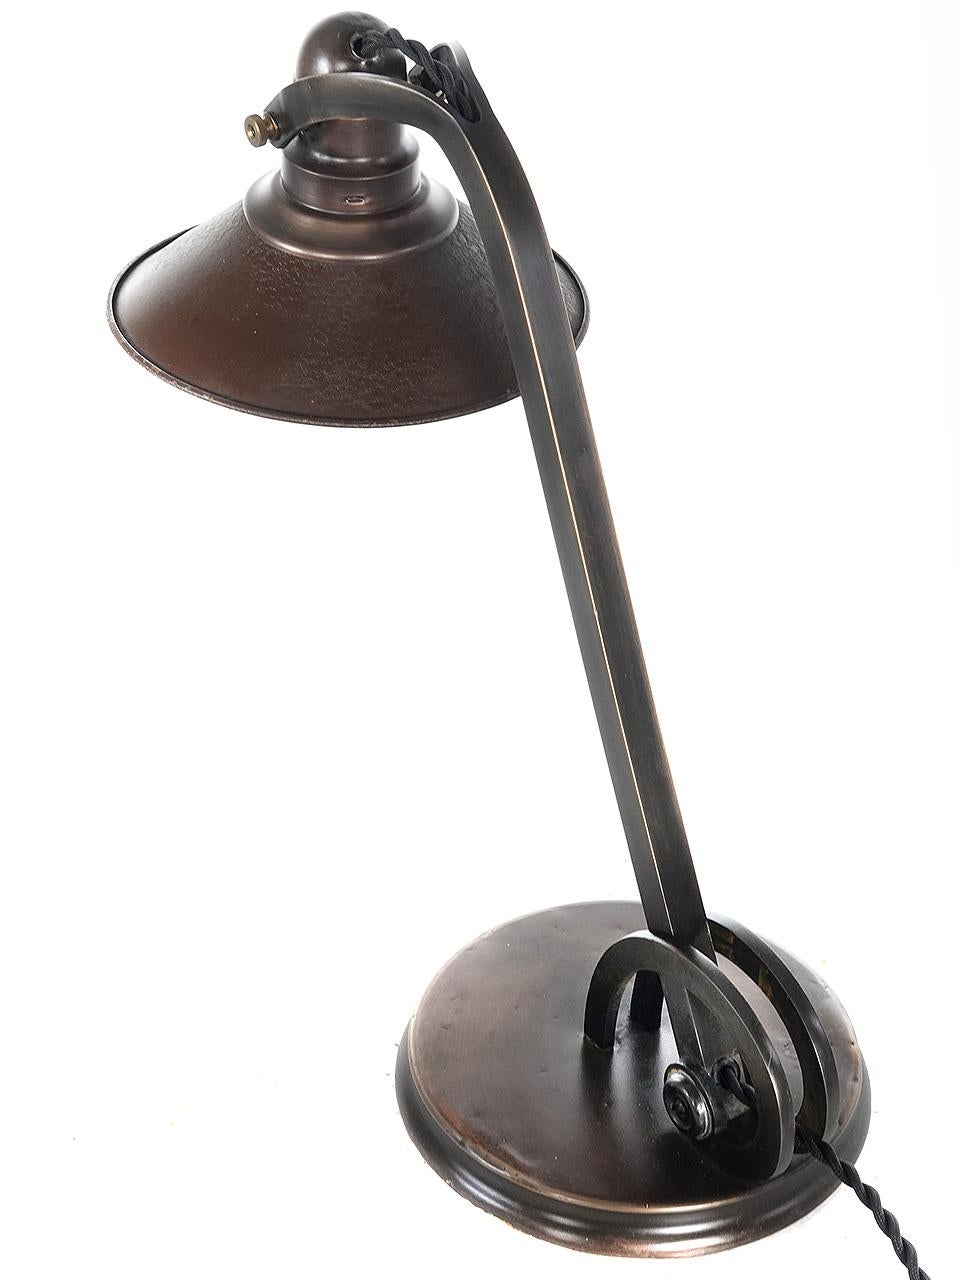 This table lamp is a first for us. Its unique and very well designed. It could be an important designer but is unsigned. The Nautilus shell inspired articulating joint is elegant as well as functional. The tin shade has the original crackle finish